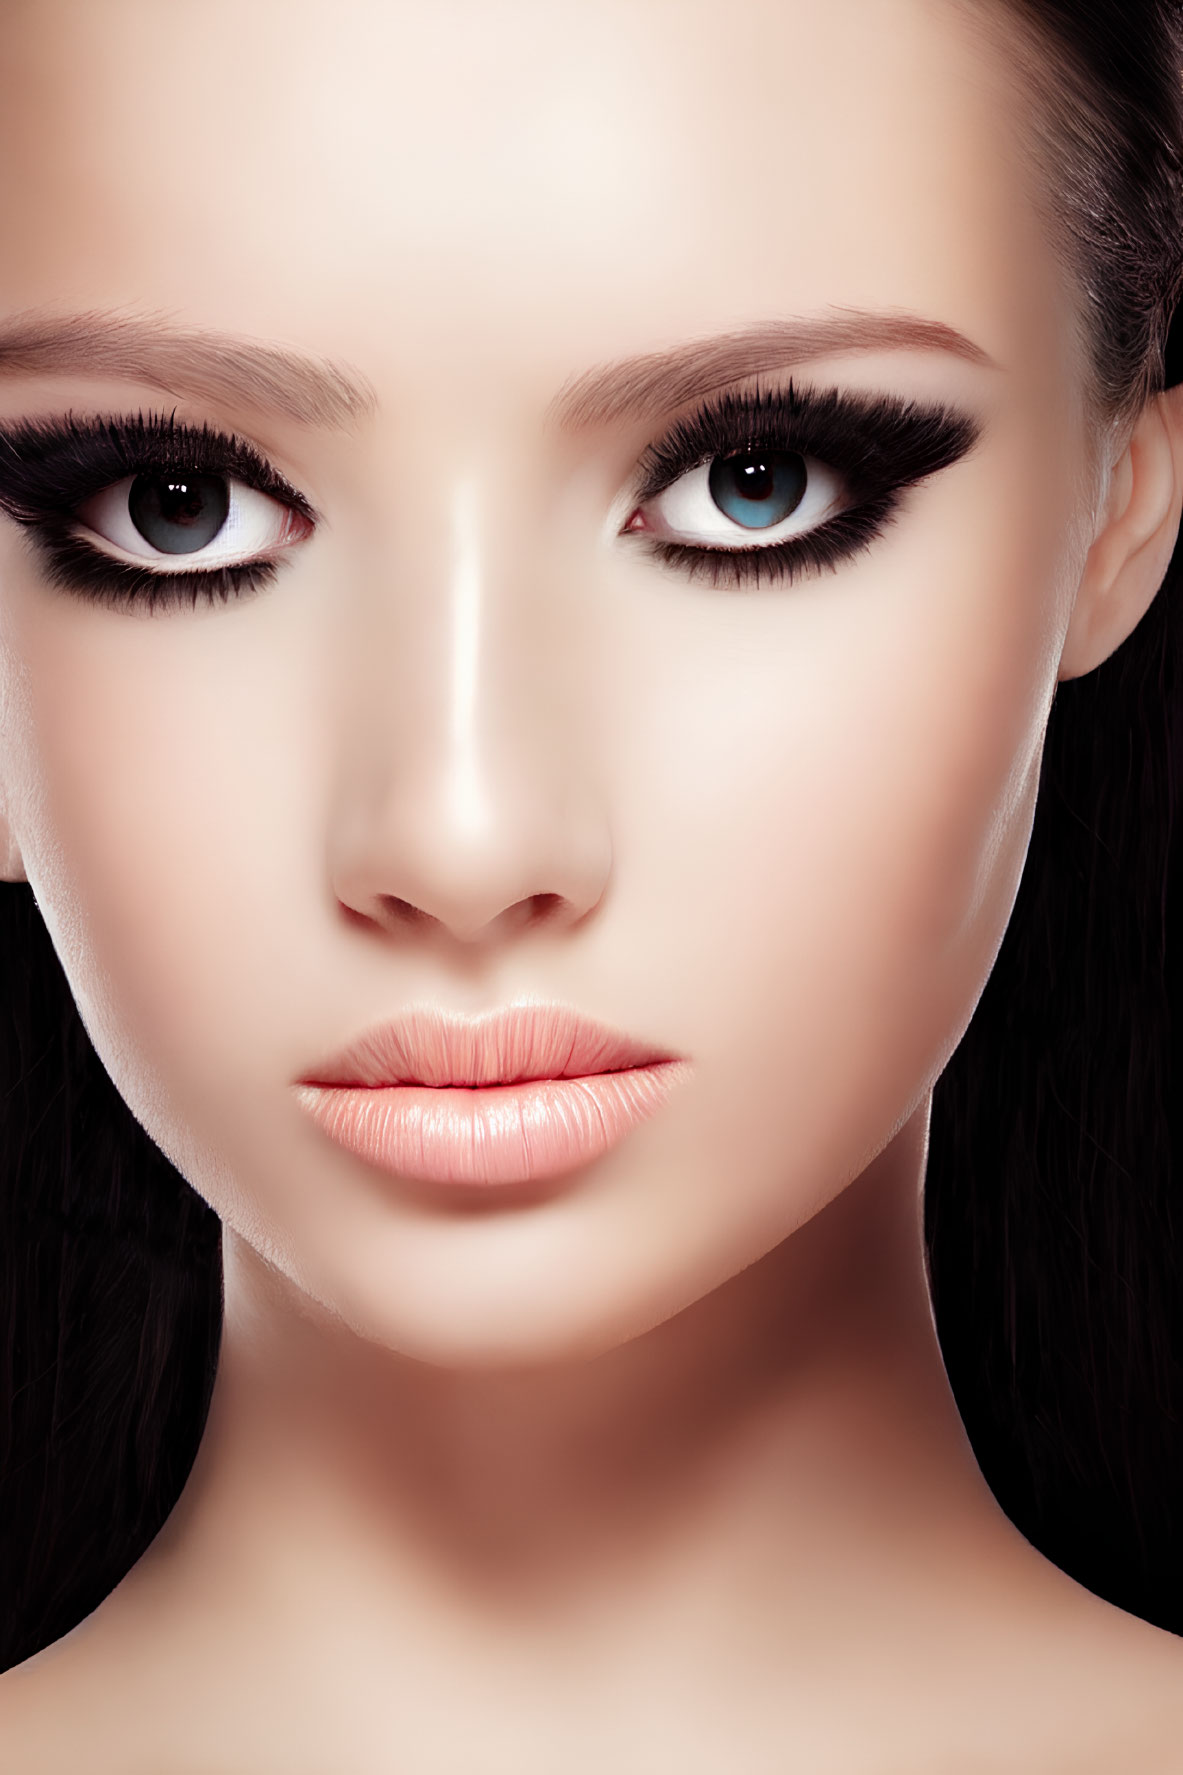 Detailed view of woman's dramatic eye makeup with thick eyeliner and long lashes, flawless skin, neutral